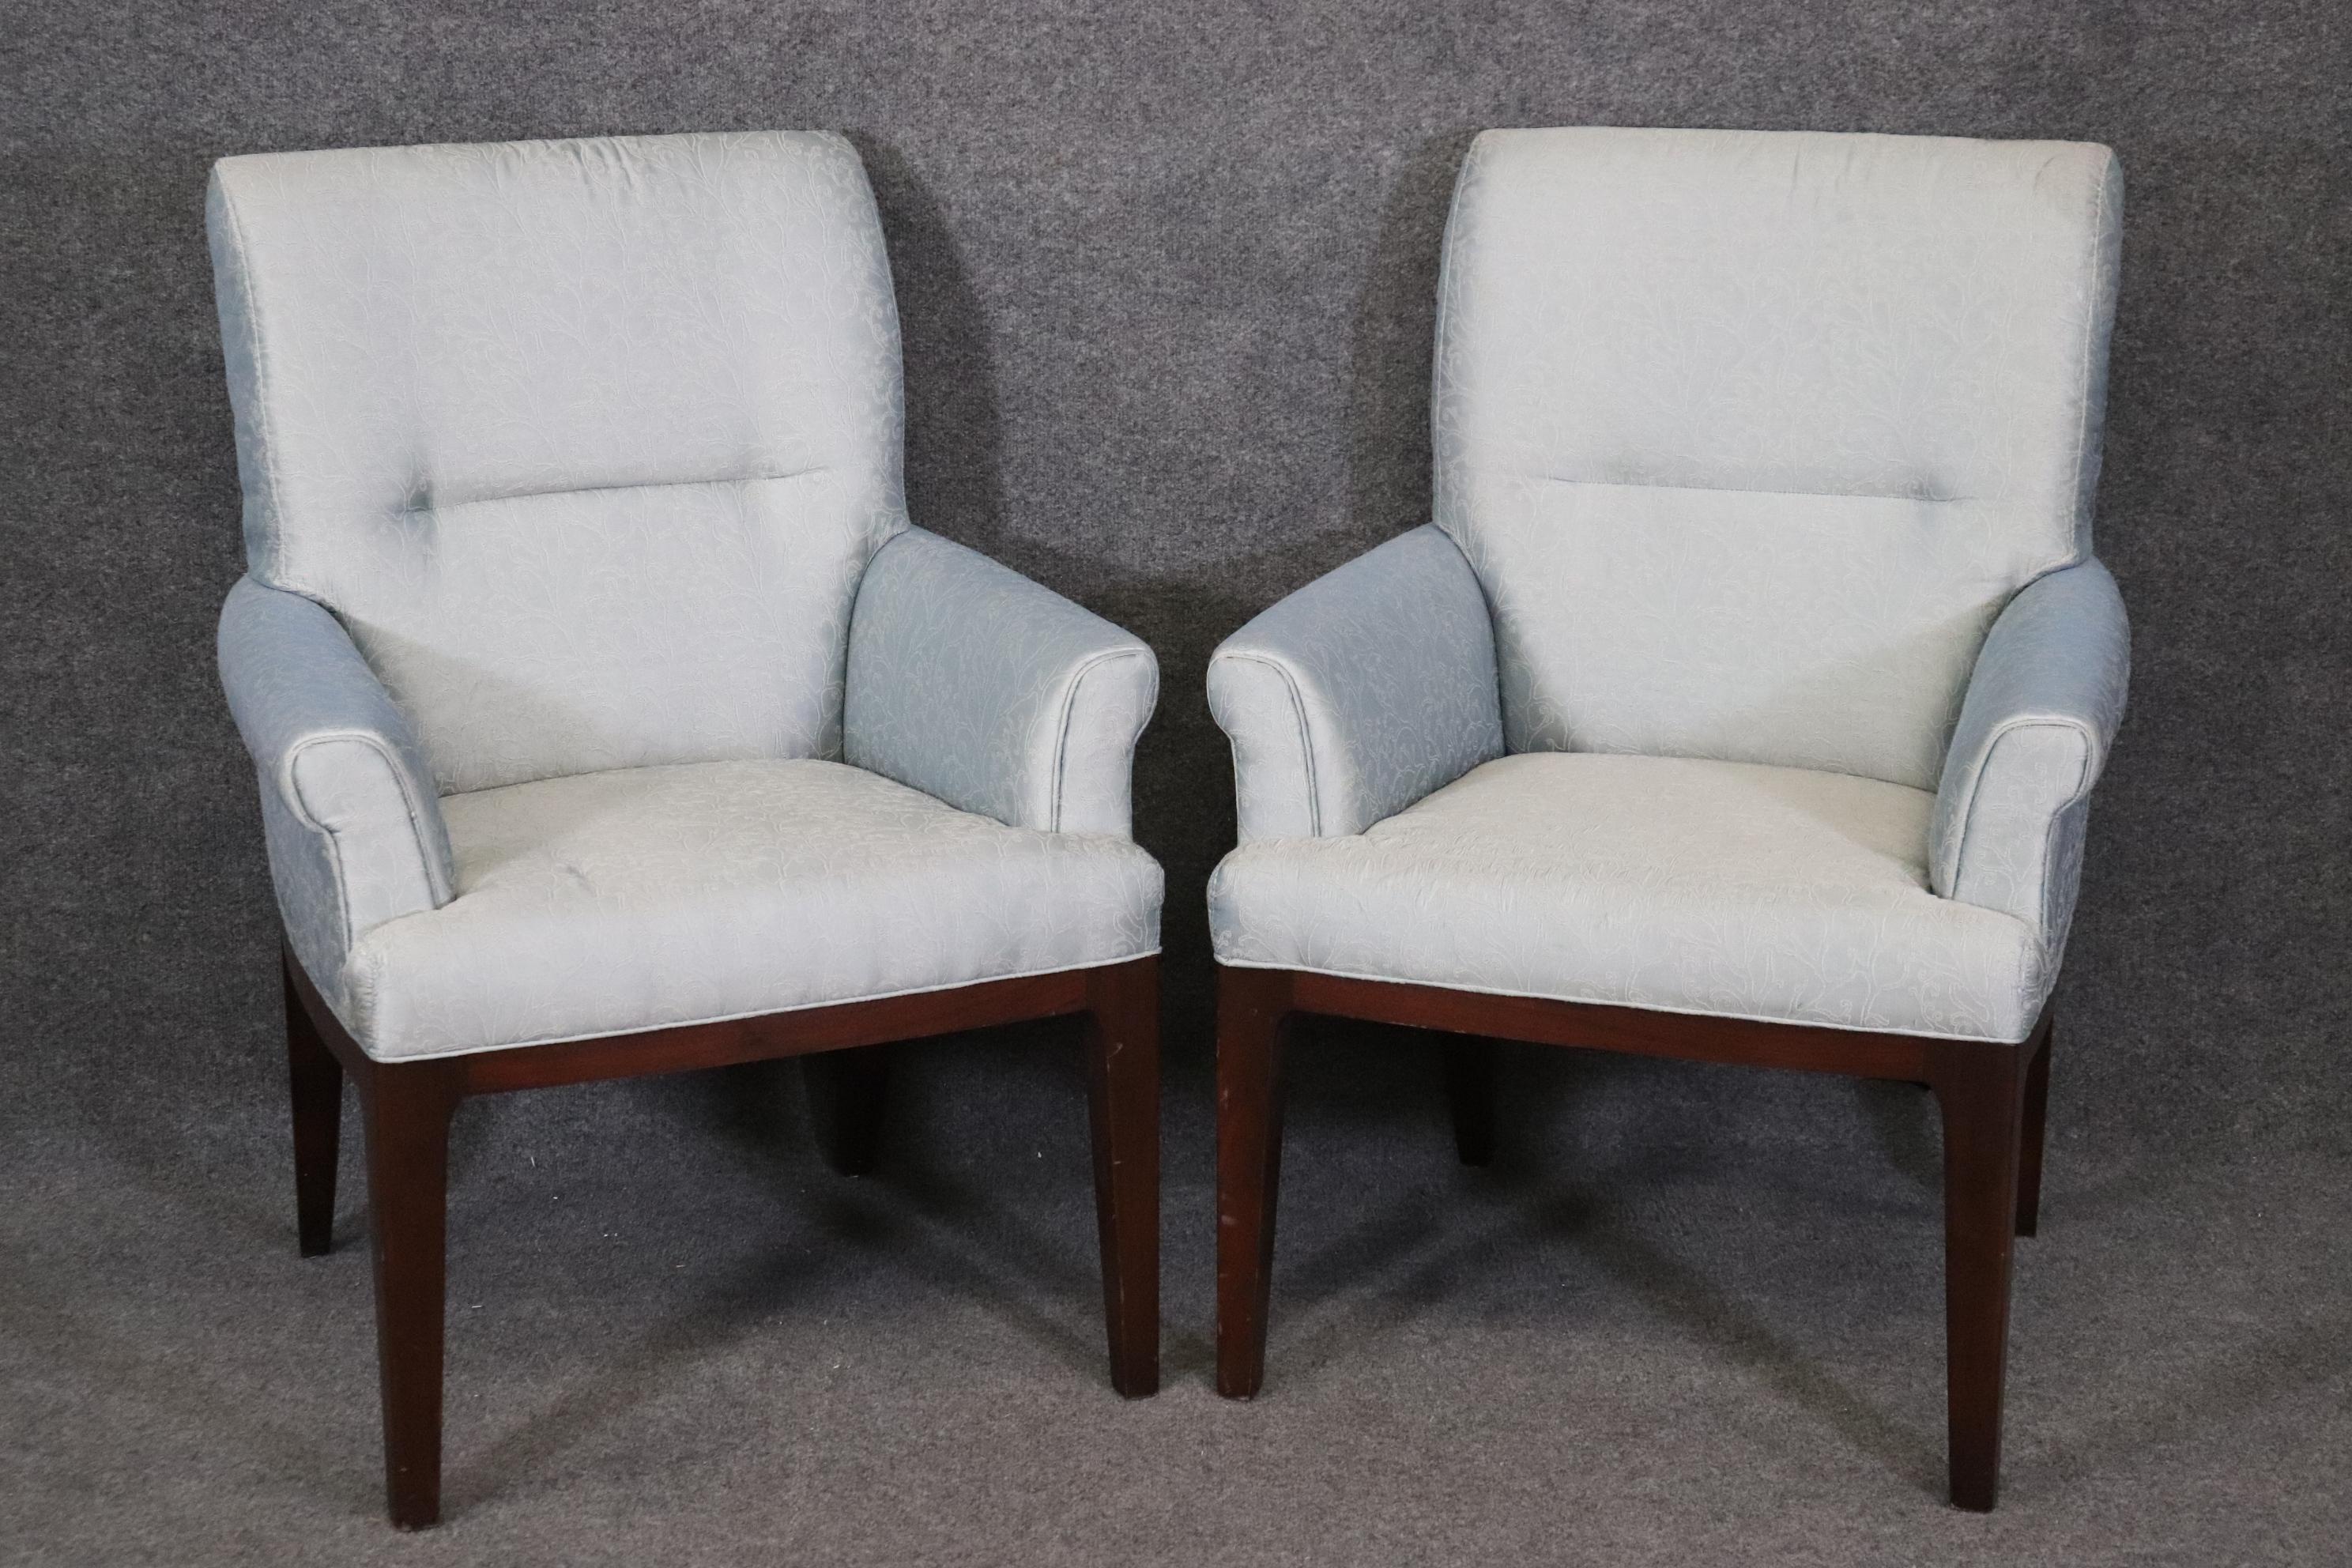 Please note we have six of these. This is a beautiful pair of Baker solid mahogany mid century modern style club chairs or bergere chairs. They could also be used at the head of a dining table as neutral captain's chairs. The chairs are in good